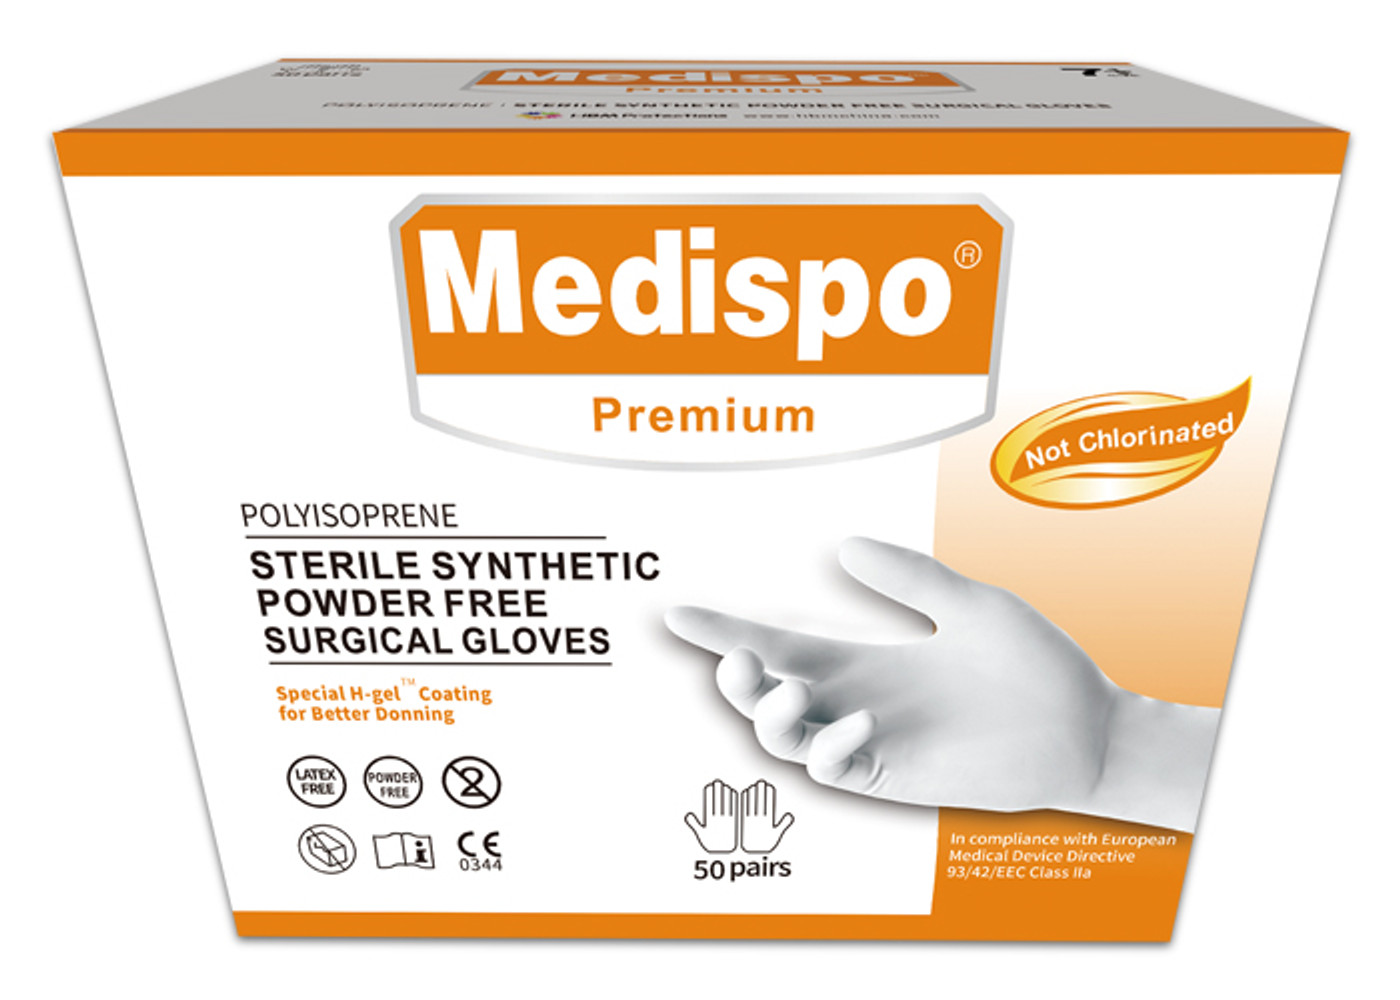 Polyisoprene Surgical gloves, Sterile, Synthetic, Powder Free